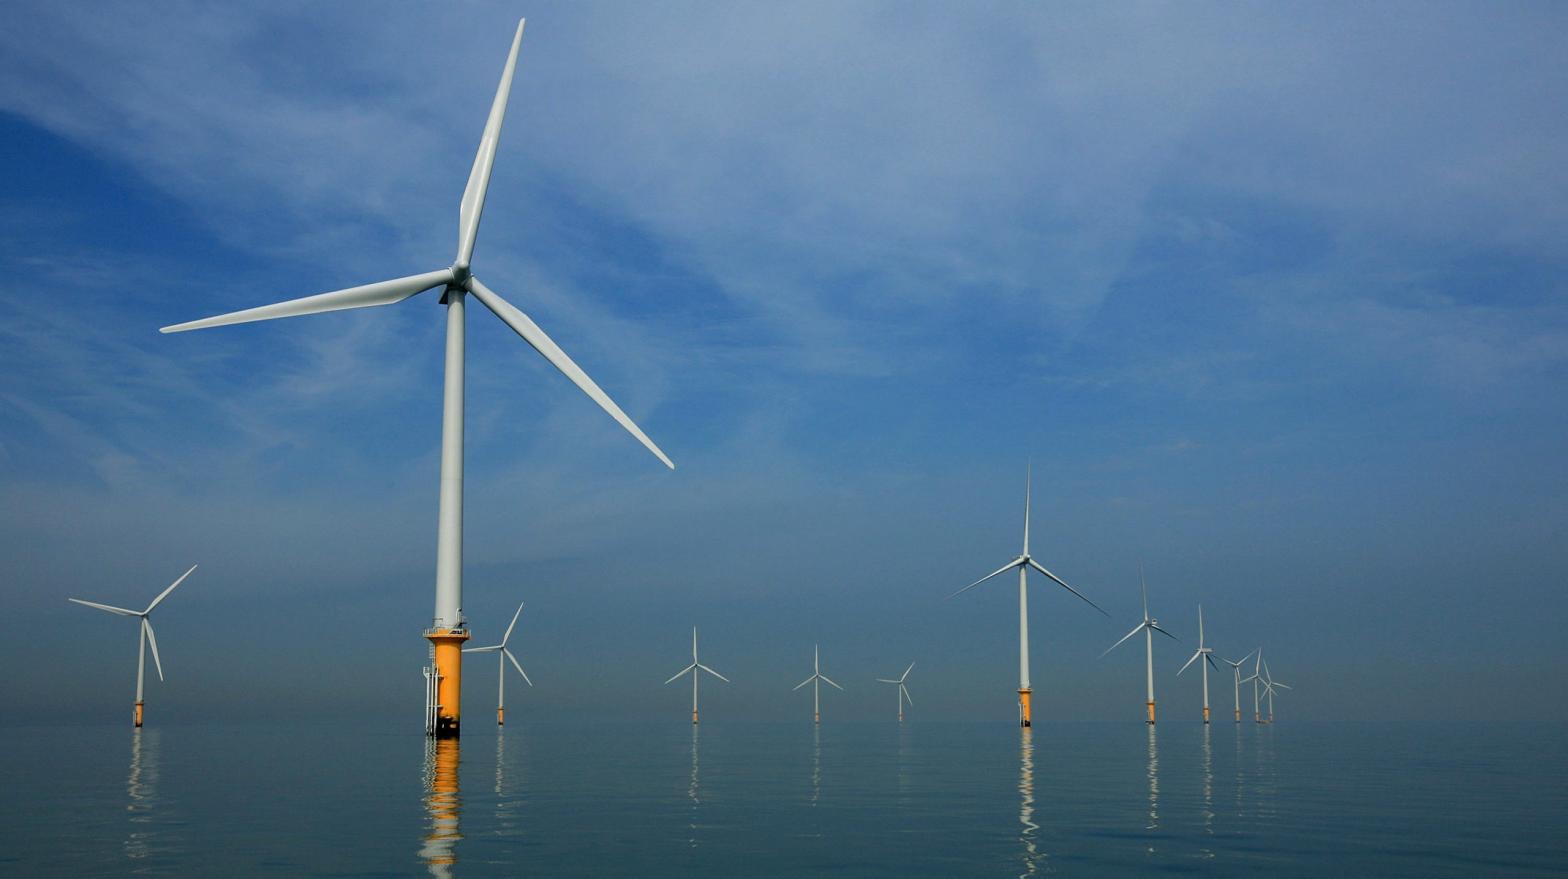 An offshore wind farm. More of these will be popping up soon. (Photo: Christopher Furlong, Getty Images)